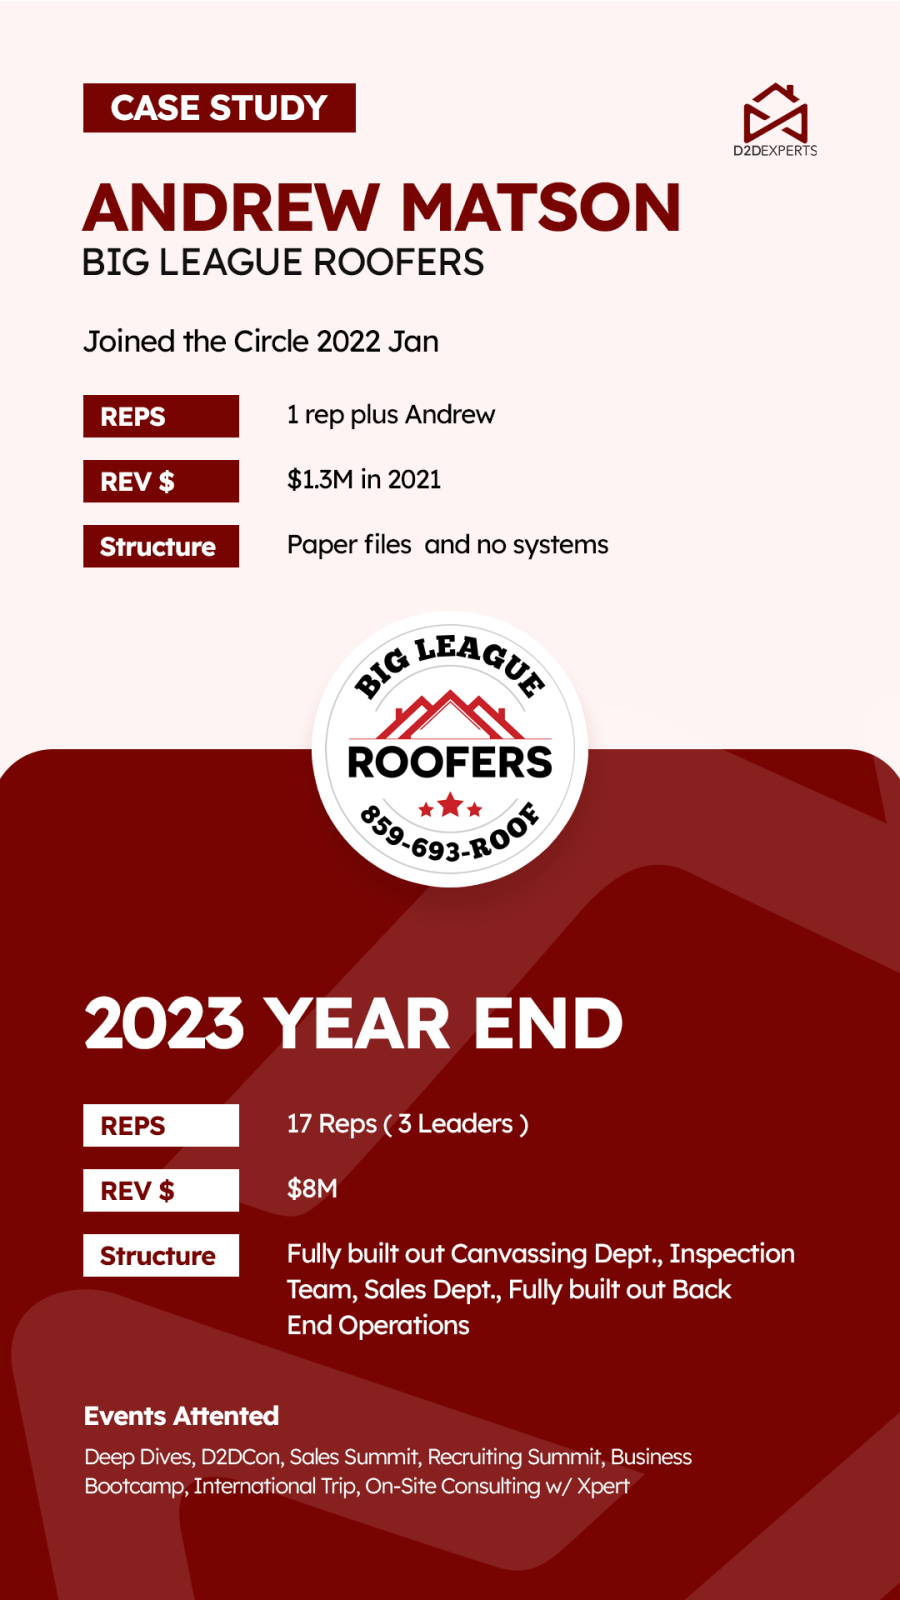 Andrew Matson's stellar 2023 year-end performance summary at Big League Roofers: celebrating achievements in sales, revenue, and team growth with innovative door-to-door sales tips.